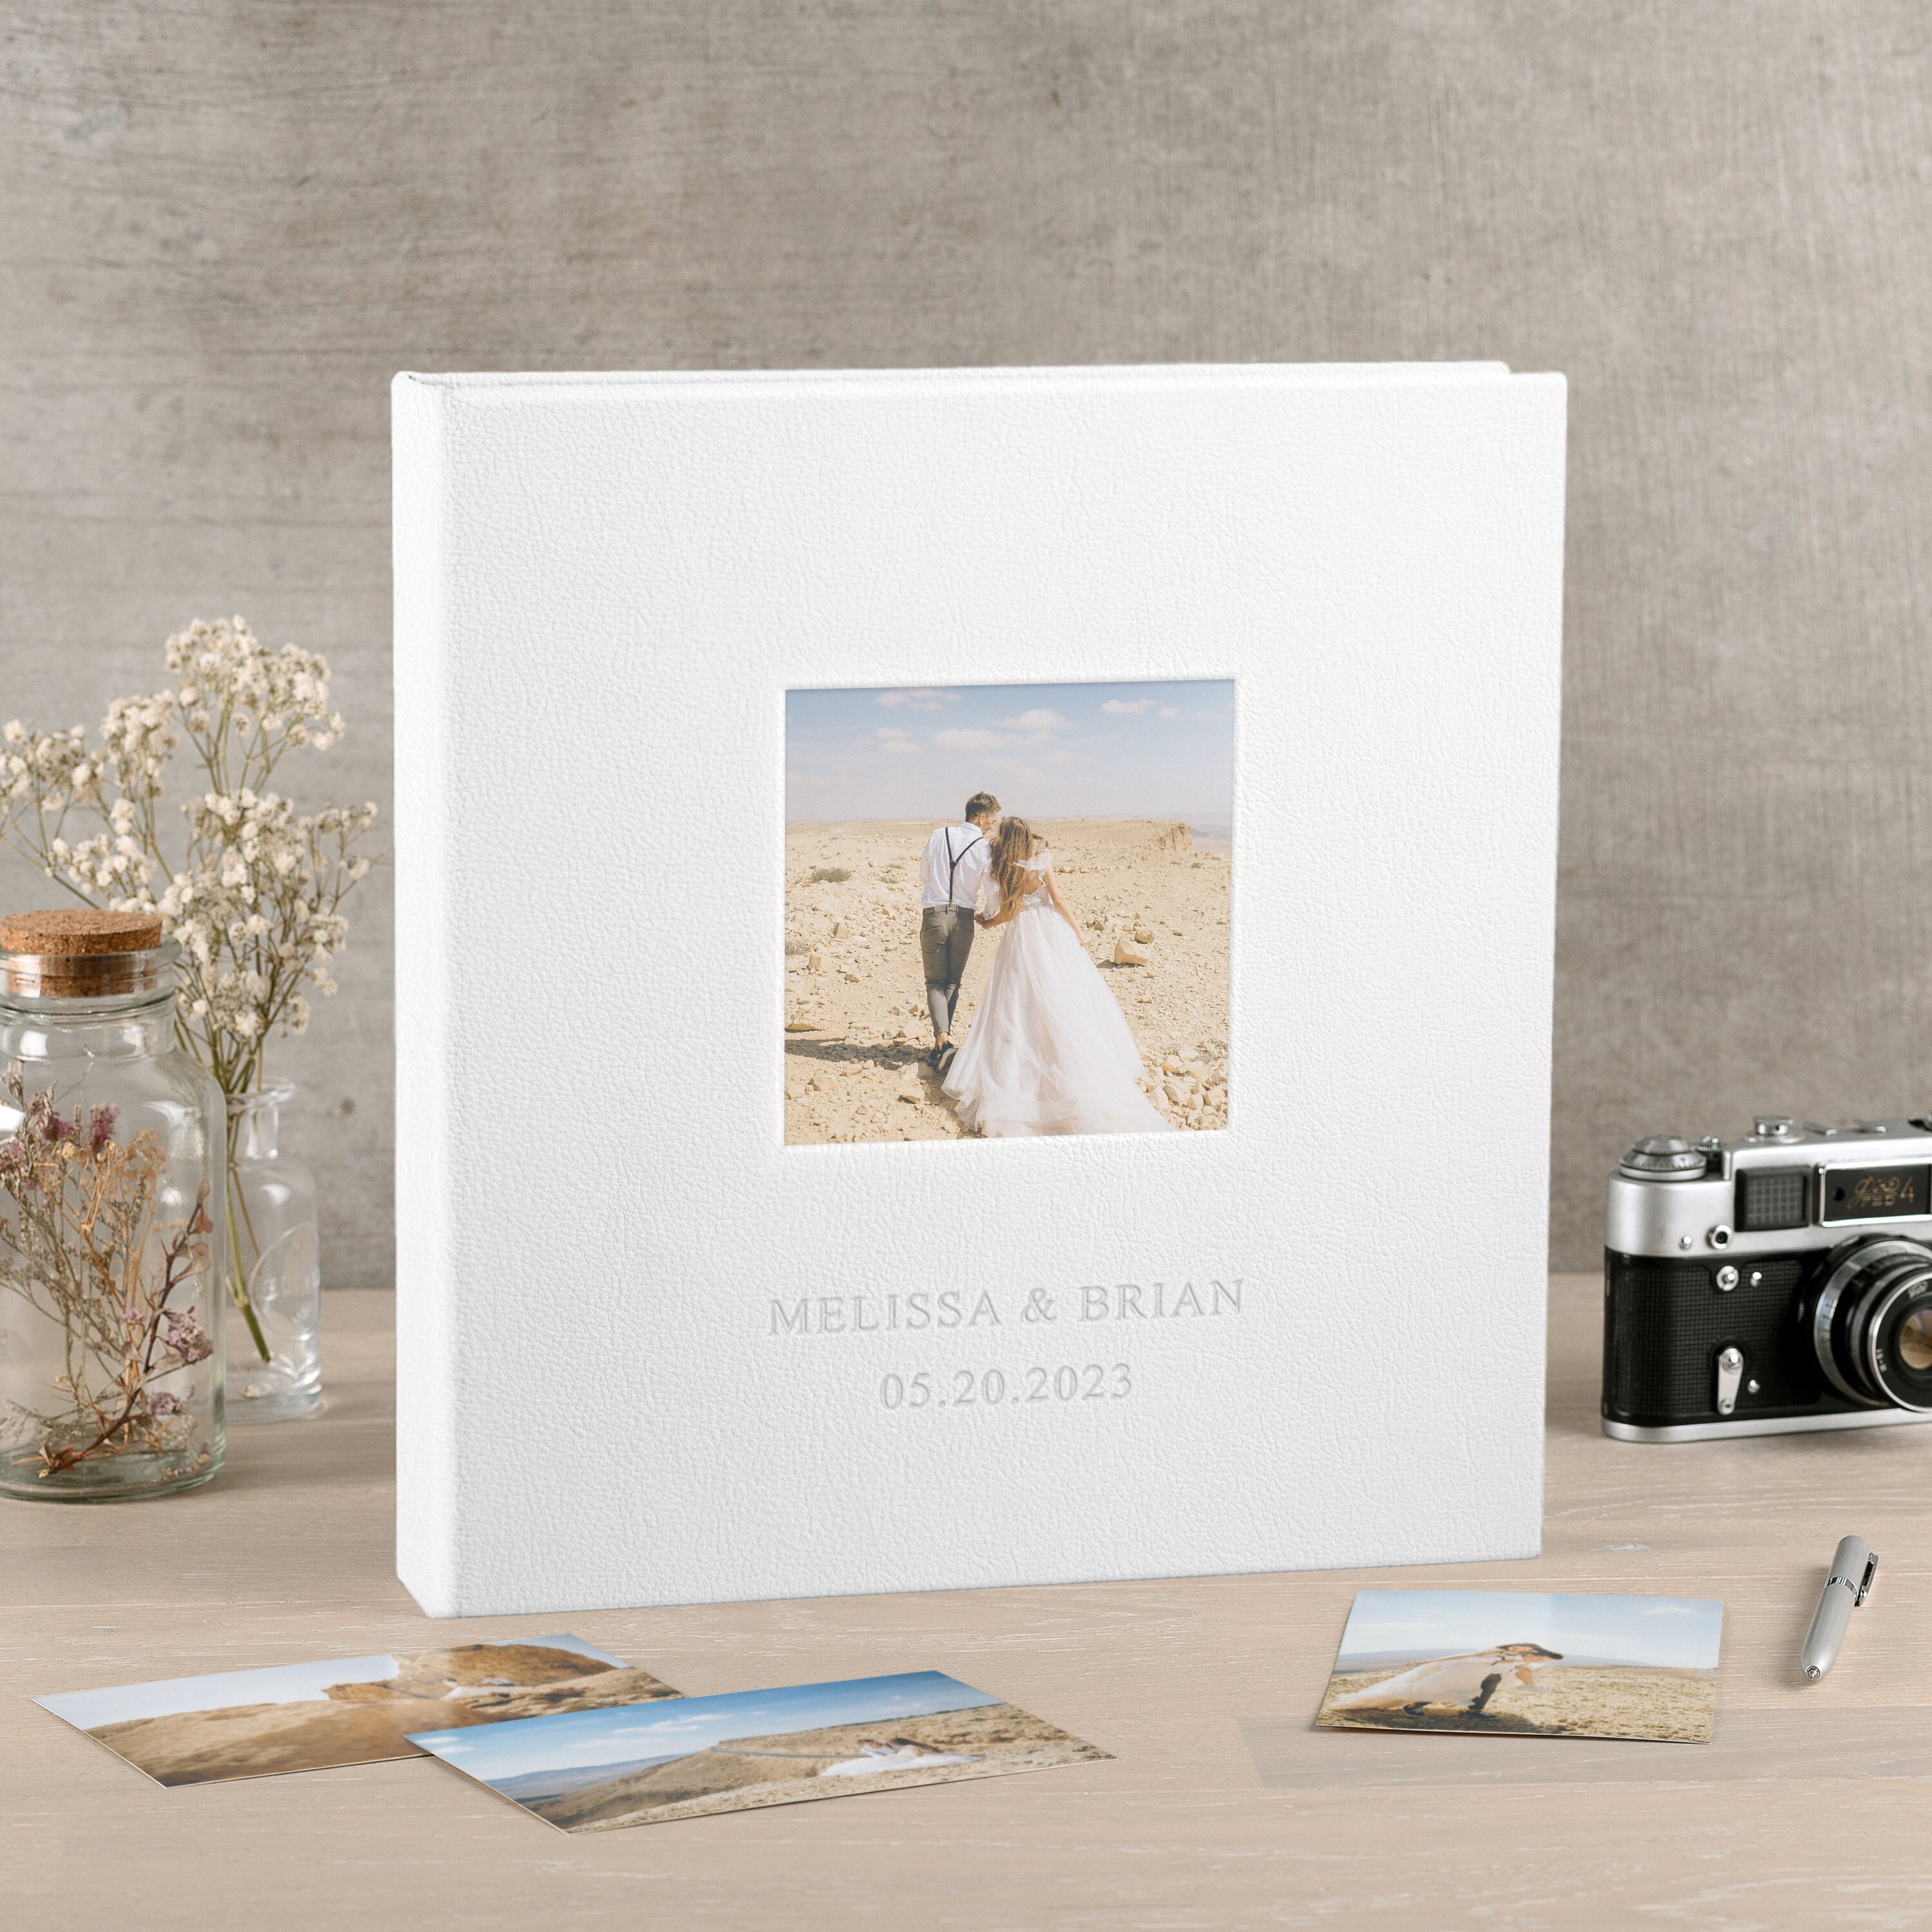 Leather Wedding Photo Album With Sleeves for 4x6 Photos Slip in Photo Album  With Photo Window Holds up to 1000 10x15cm Photos 